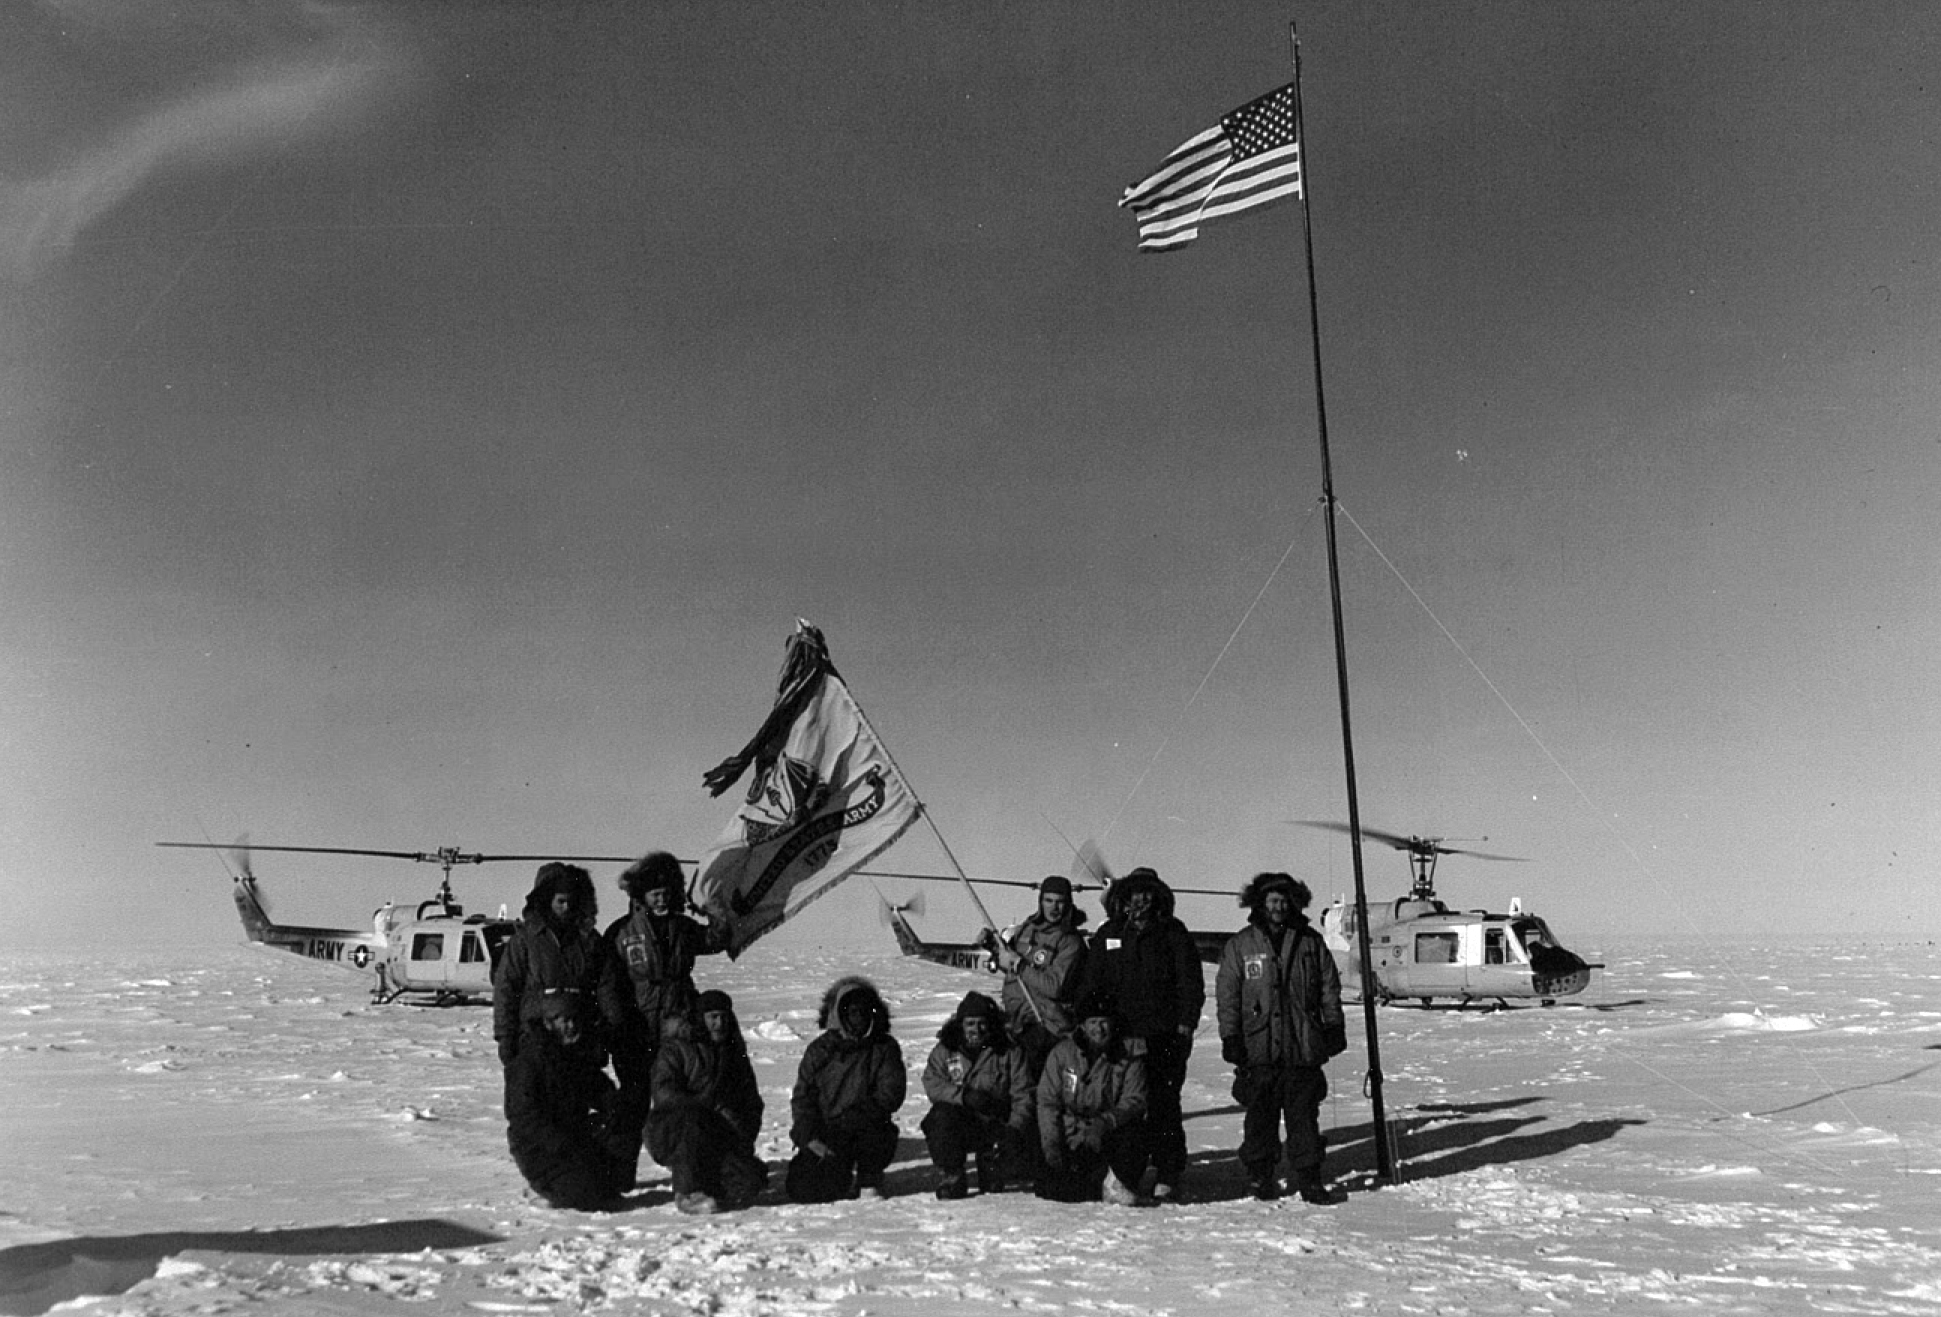 Men stand next to a flagpole on ice.